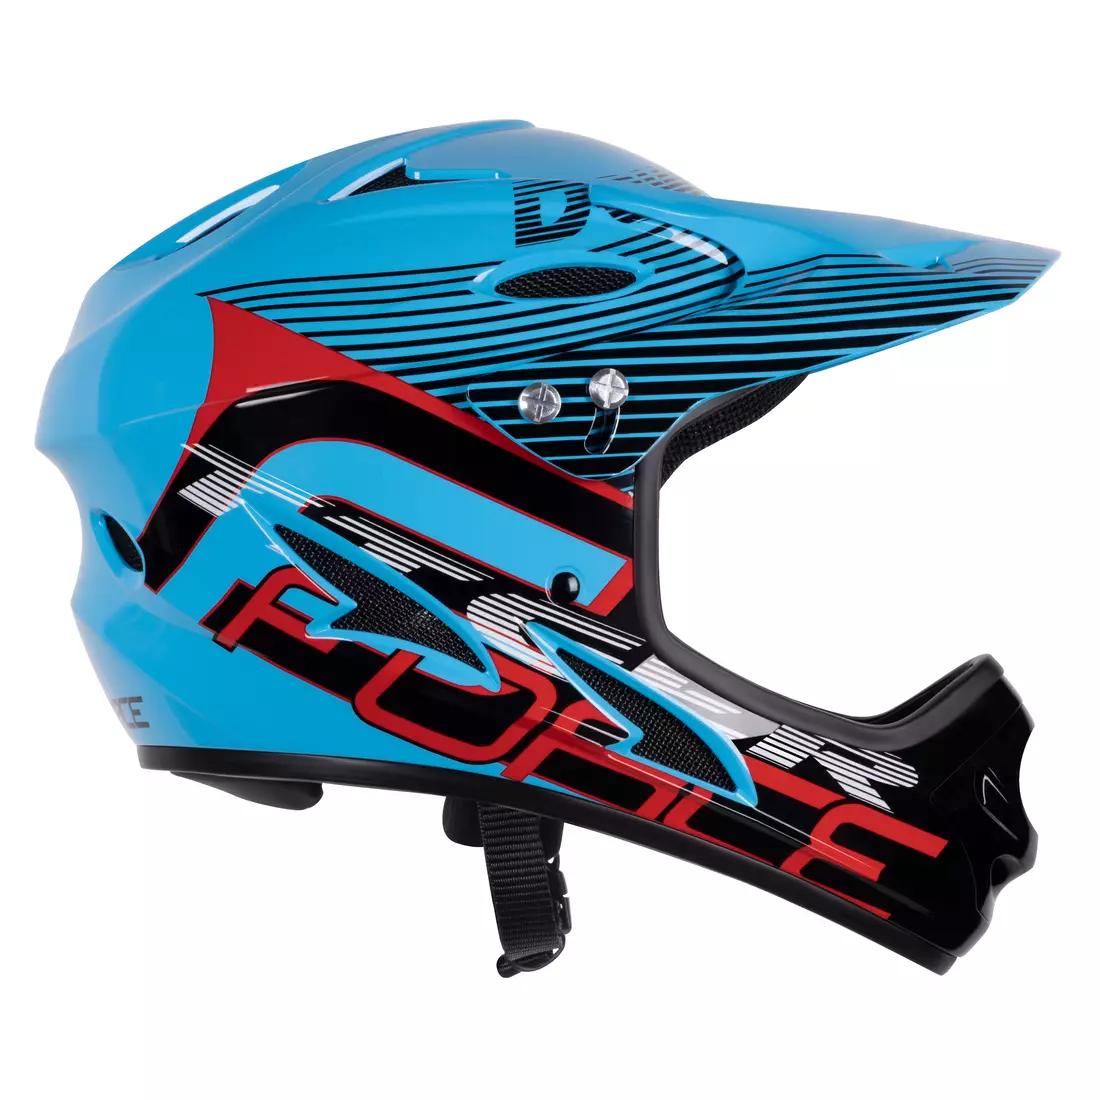 FORCE bicycle helmet TIGER downhill, blue-black-red 902106